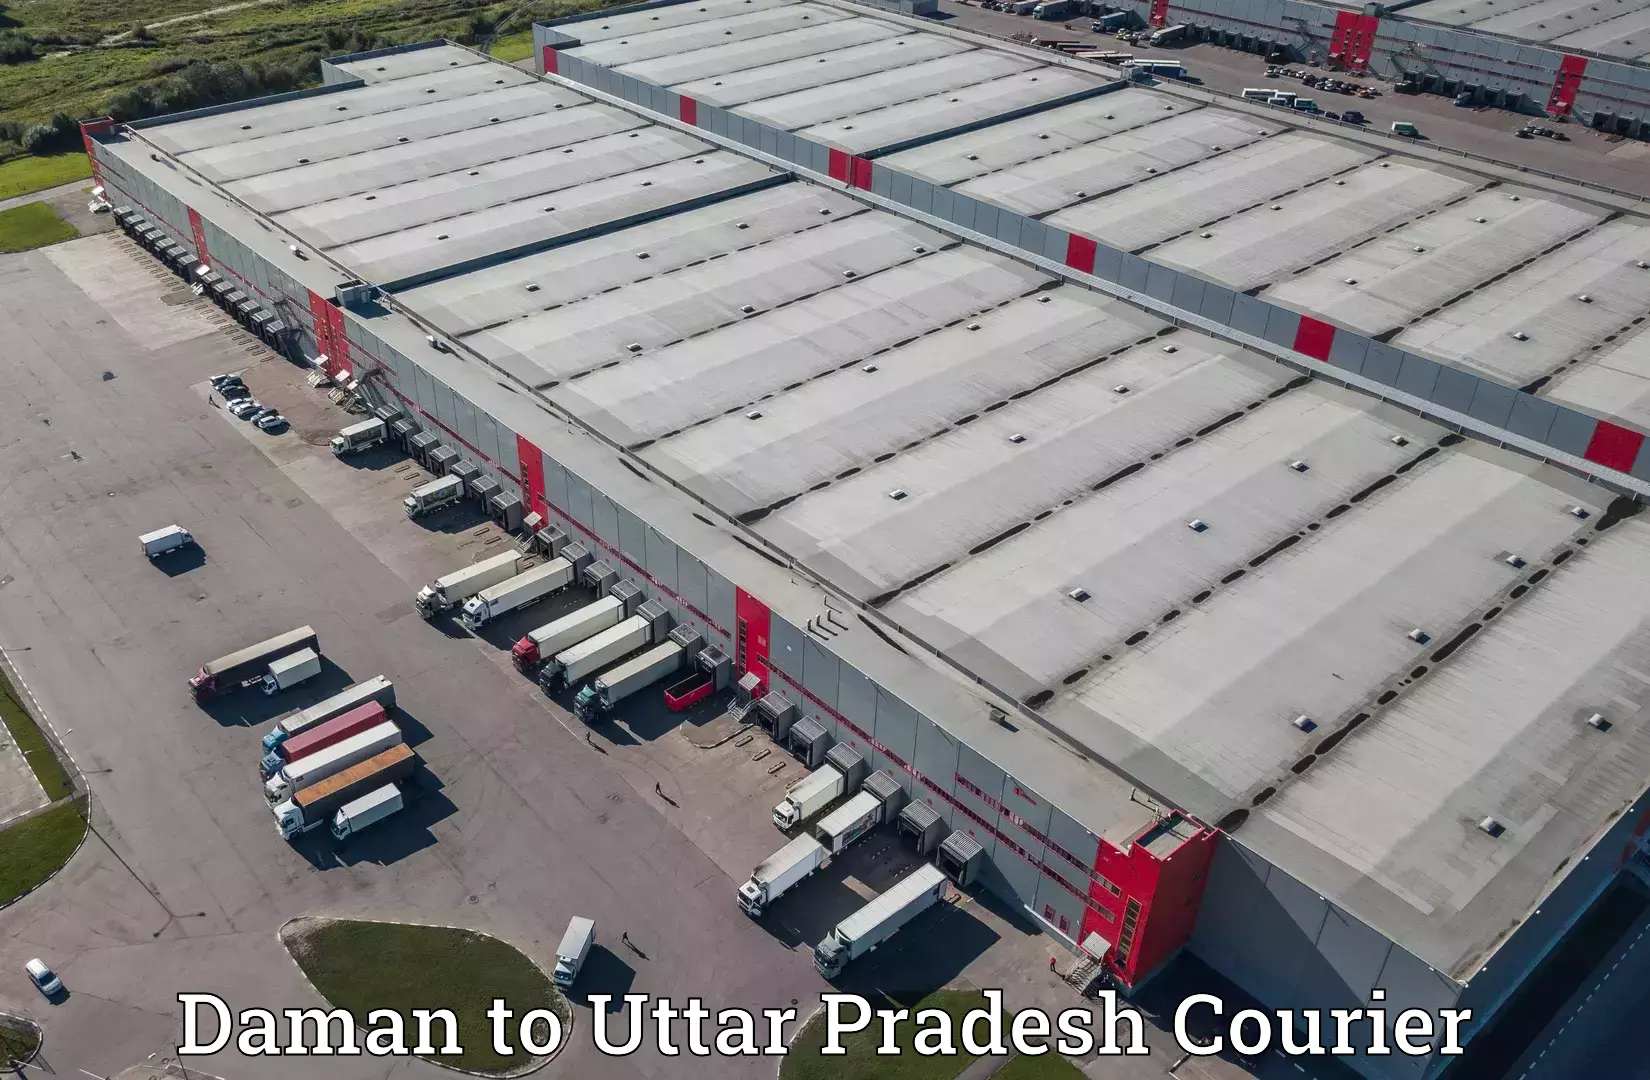 Package delivery network Daman to Uttar Pradesh